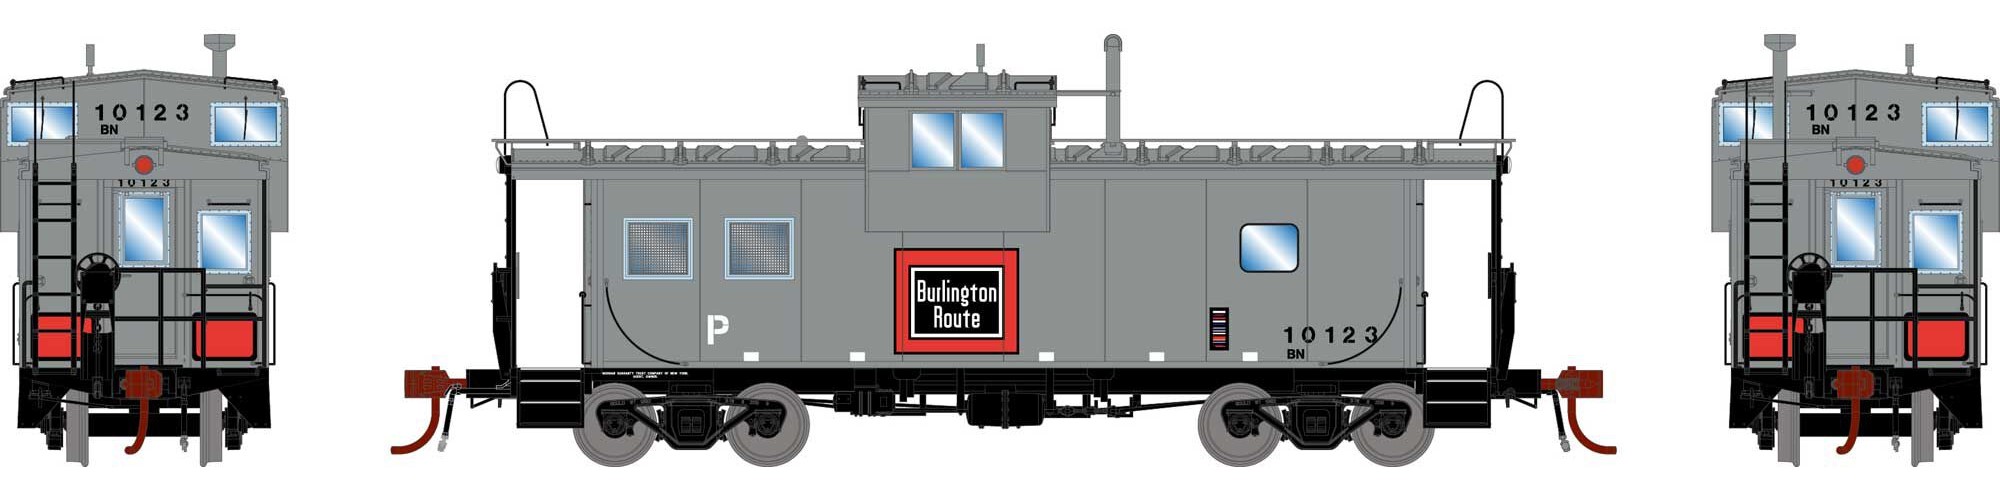 Athearn Genesis HO ATHG78366 DCC/Tsunami SoundCar Equipped ICC Caboose w/Lights & Sound Burlington Northern 'Patched' BN #10123